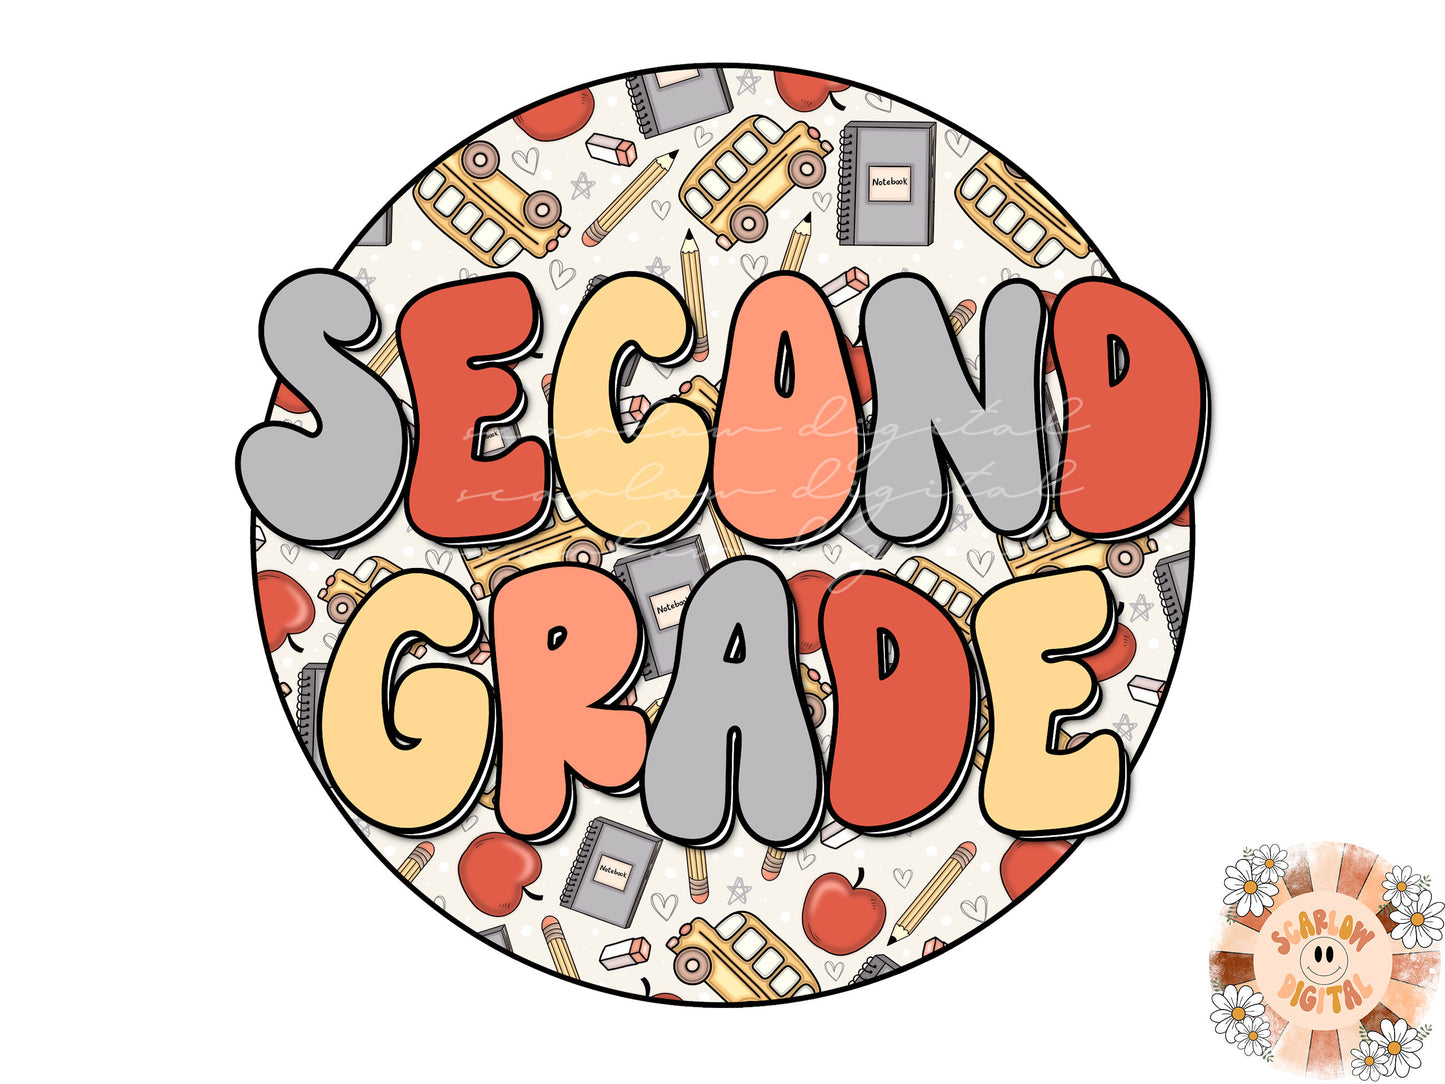 Second Grade PNG-Back To School Sublimation Design Download-Elementary school png, second grade teacher png, school sublimation, teacher png